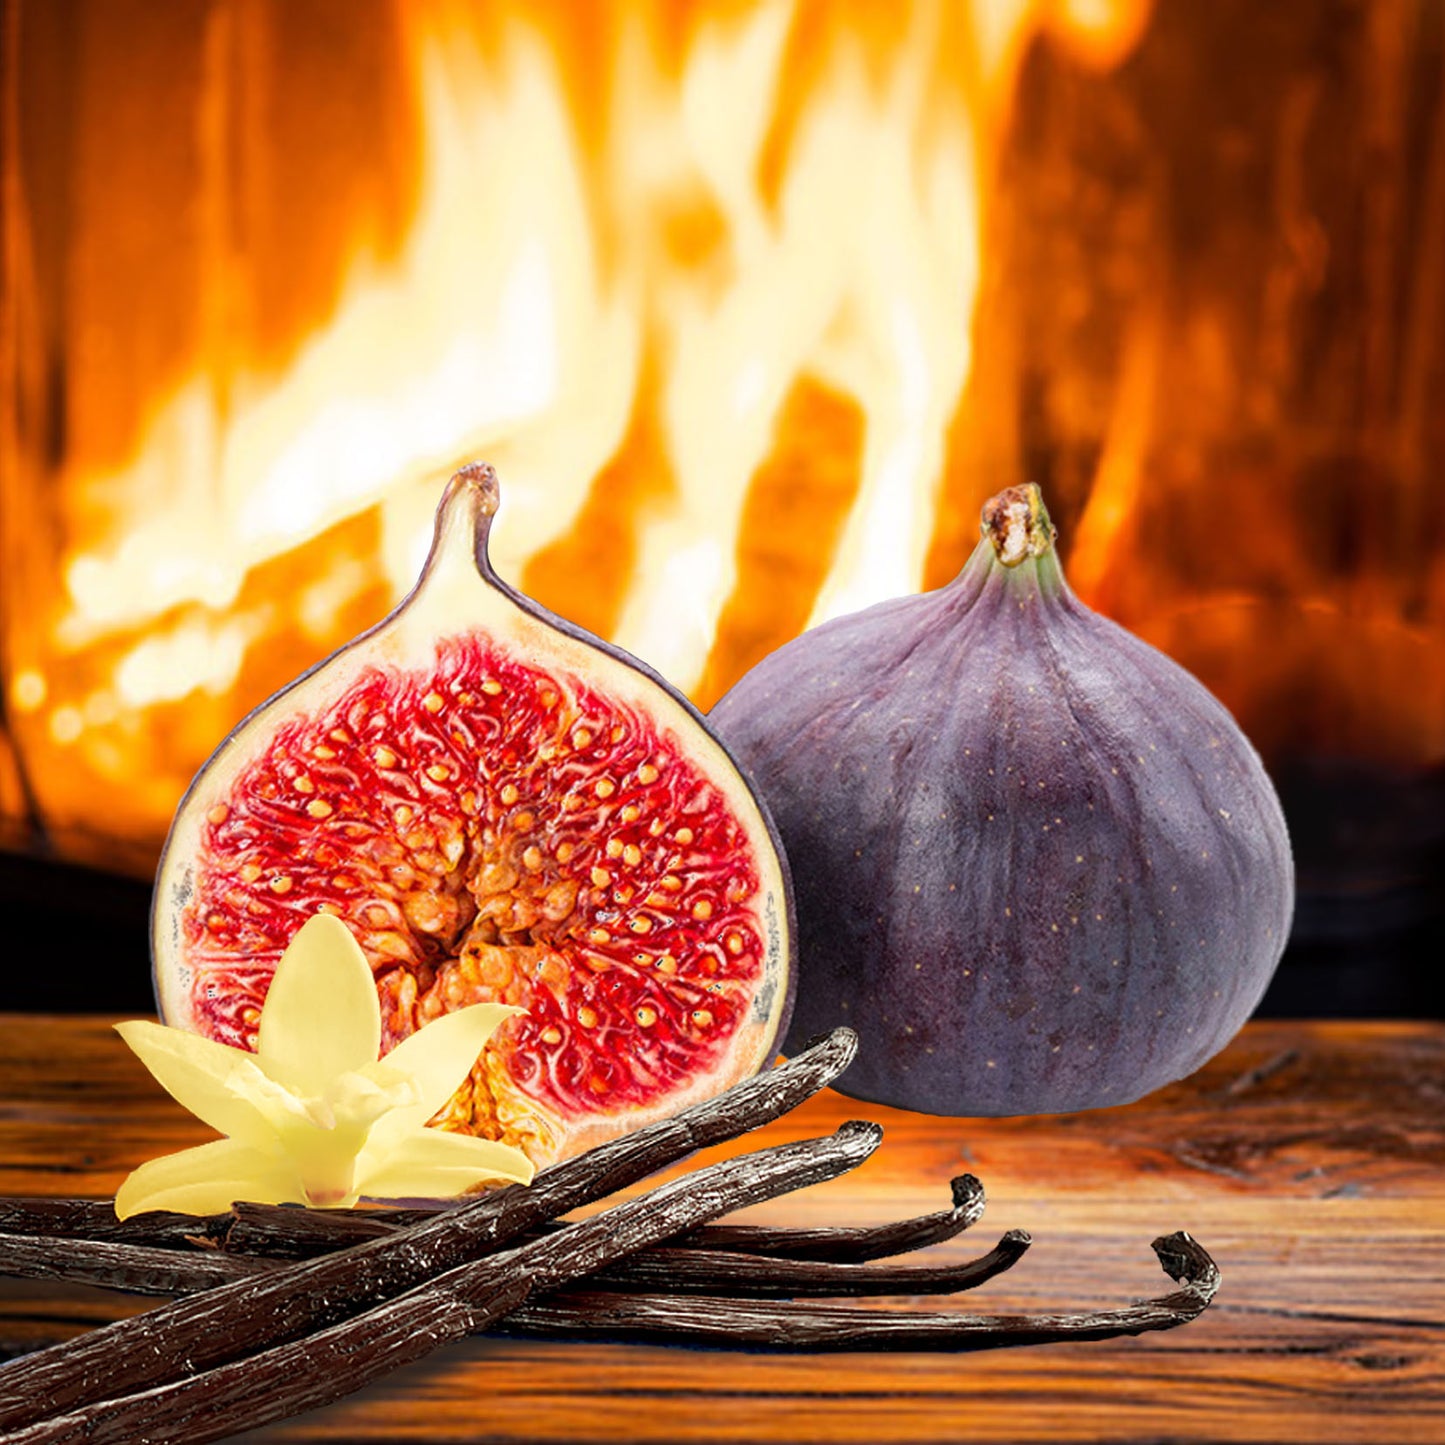 Warm Vanilla Fig Fragrance Oil | Truly Personal | Candles, Wax Melts, Soap, Bath Bombs